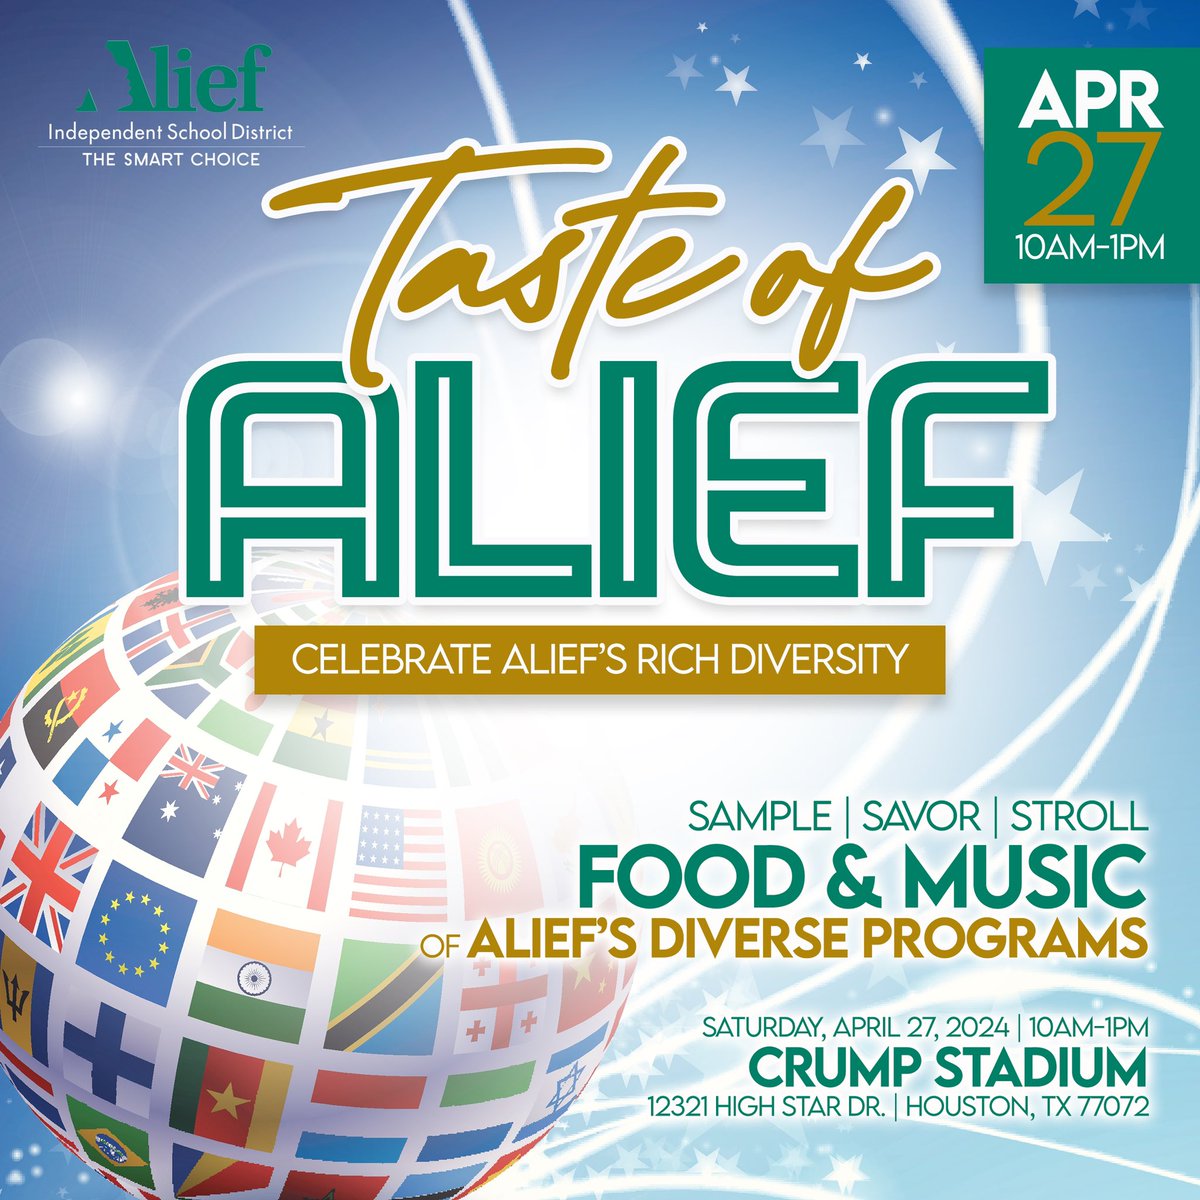 Join us for the vibrant Alief International Parade kicking off at 9 am on Saturday, April 27! Stick around for Taste of Alief at Crump Stadium! Don't miss out - scan the QR code to register your float and be part of the excitement! #AliefParade #TasteOfAlief